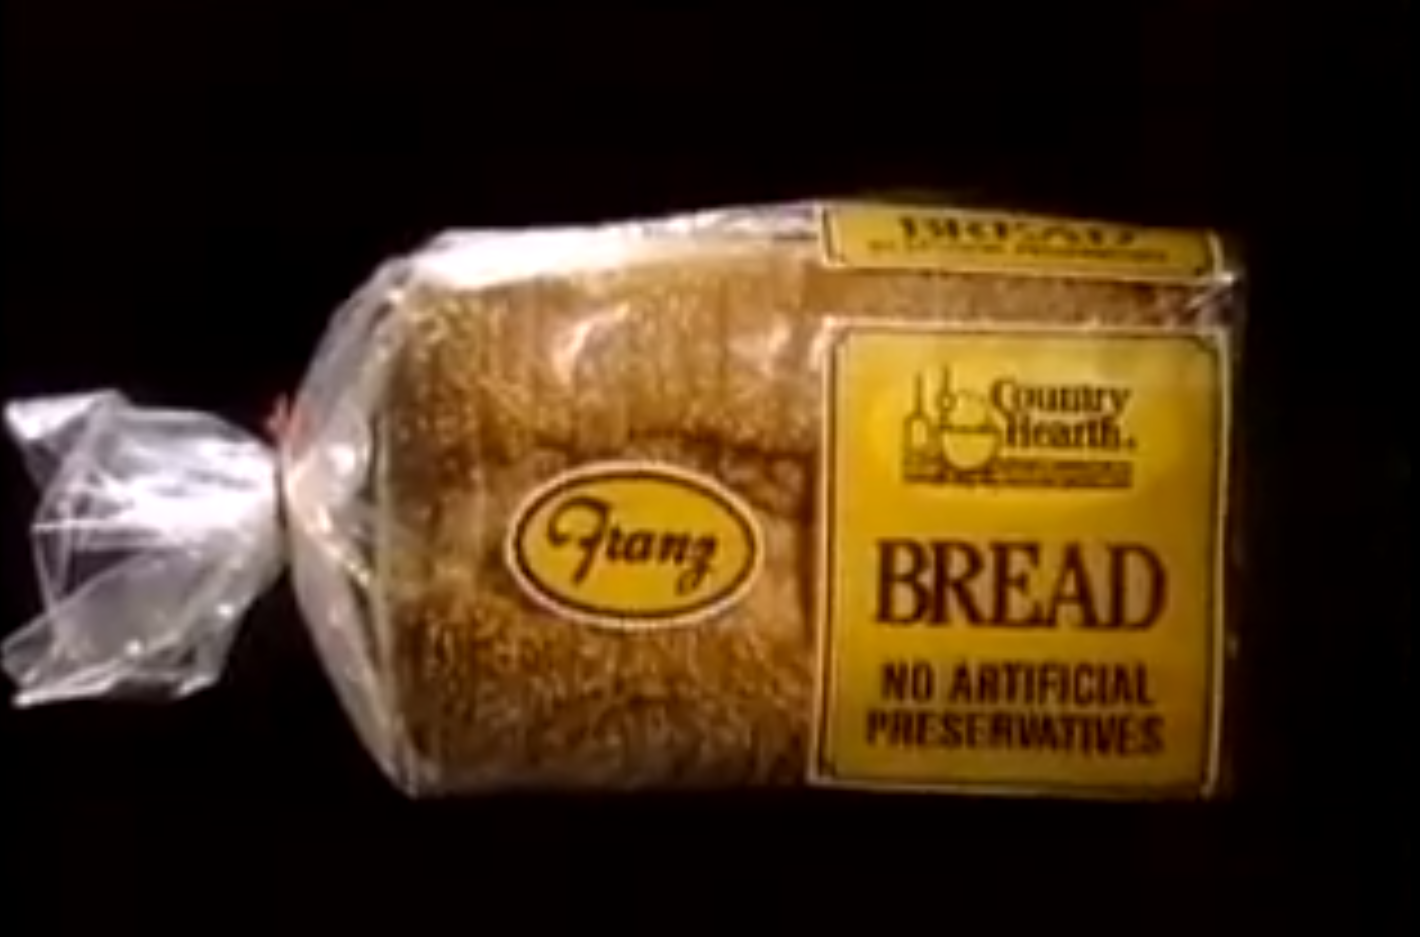 Franz Bread, Television advertising by Daryle Rico Creative Services